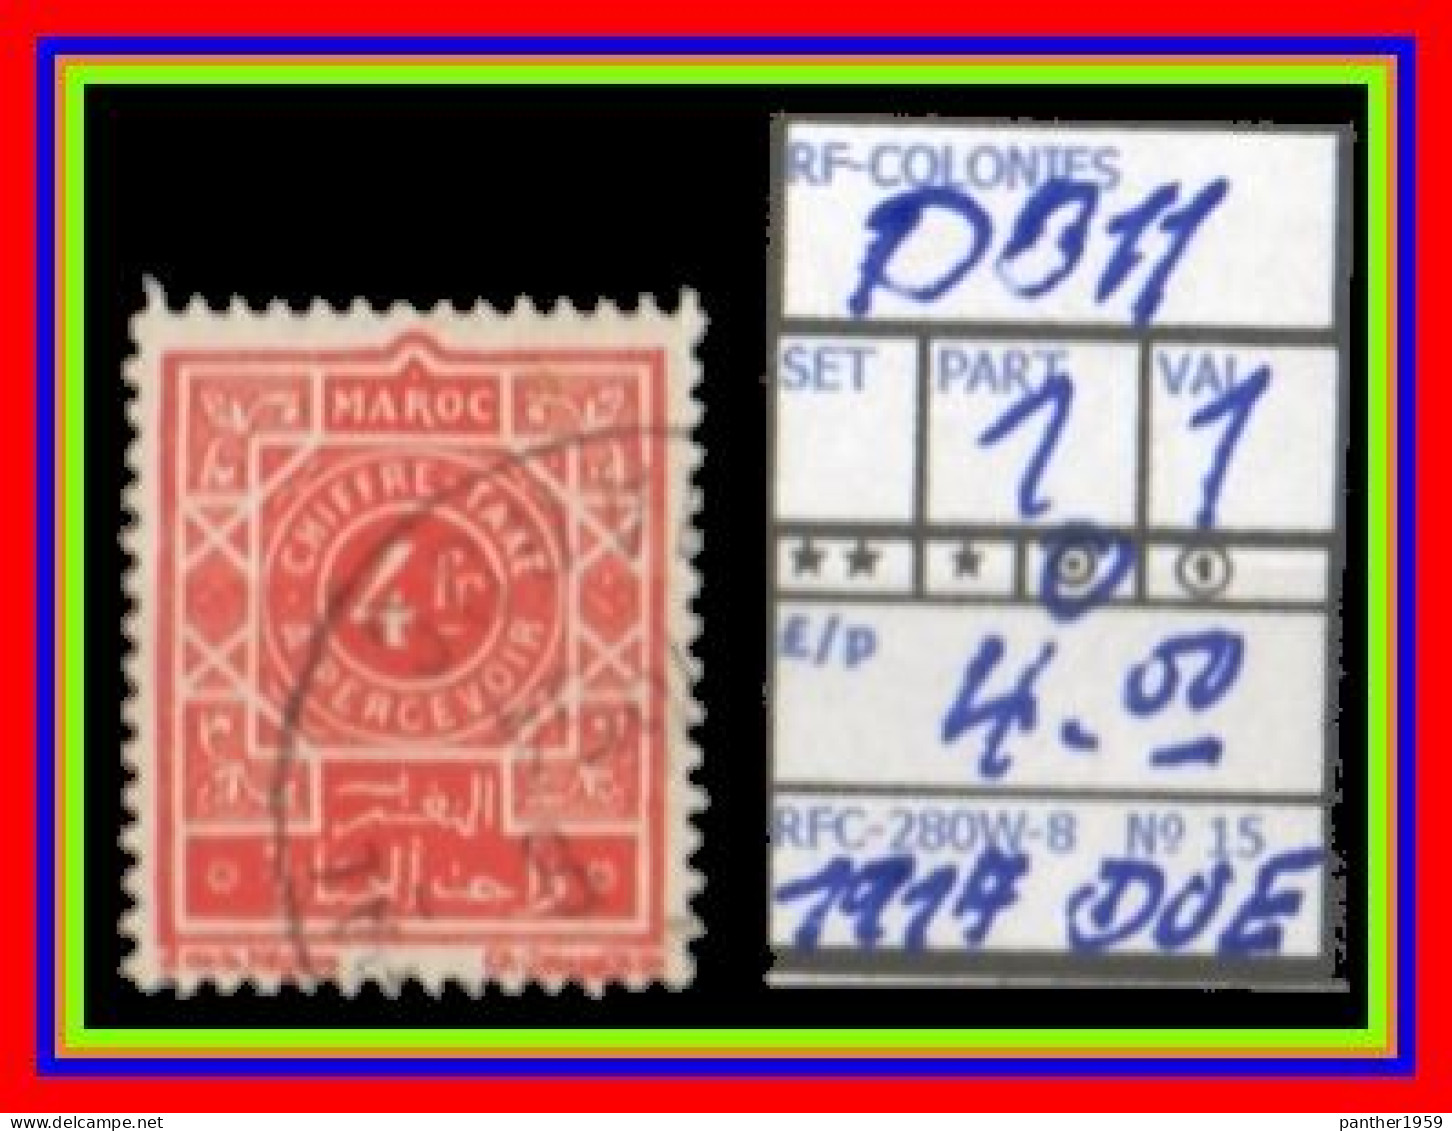 EUROPE>FRANCE COLONIES# MOROCCO# #DEFINITIVES#PARTIAL SET# MNH/**MH*#USED (RFC-280W-8) (15) - Timbres-taxe